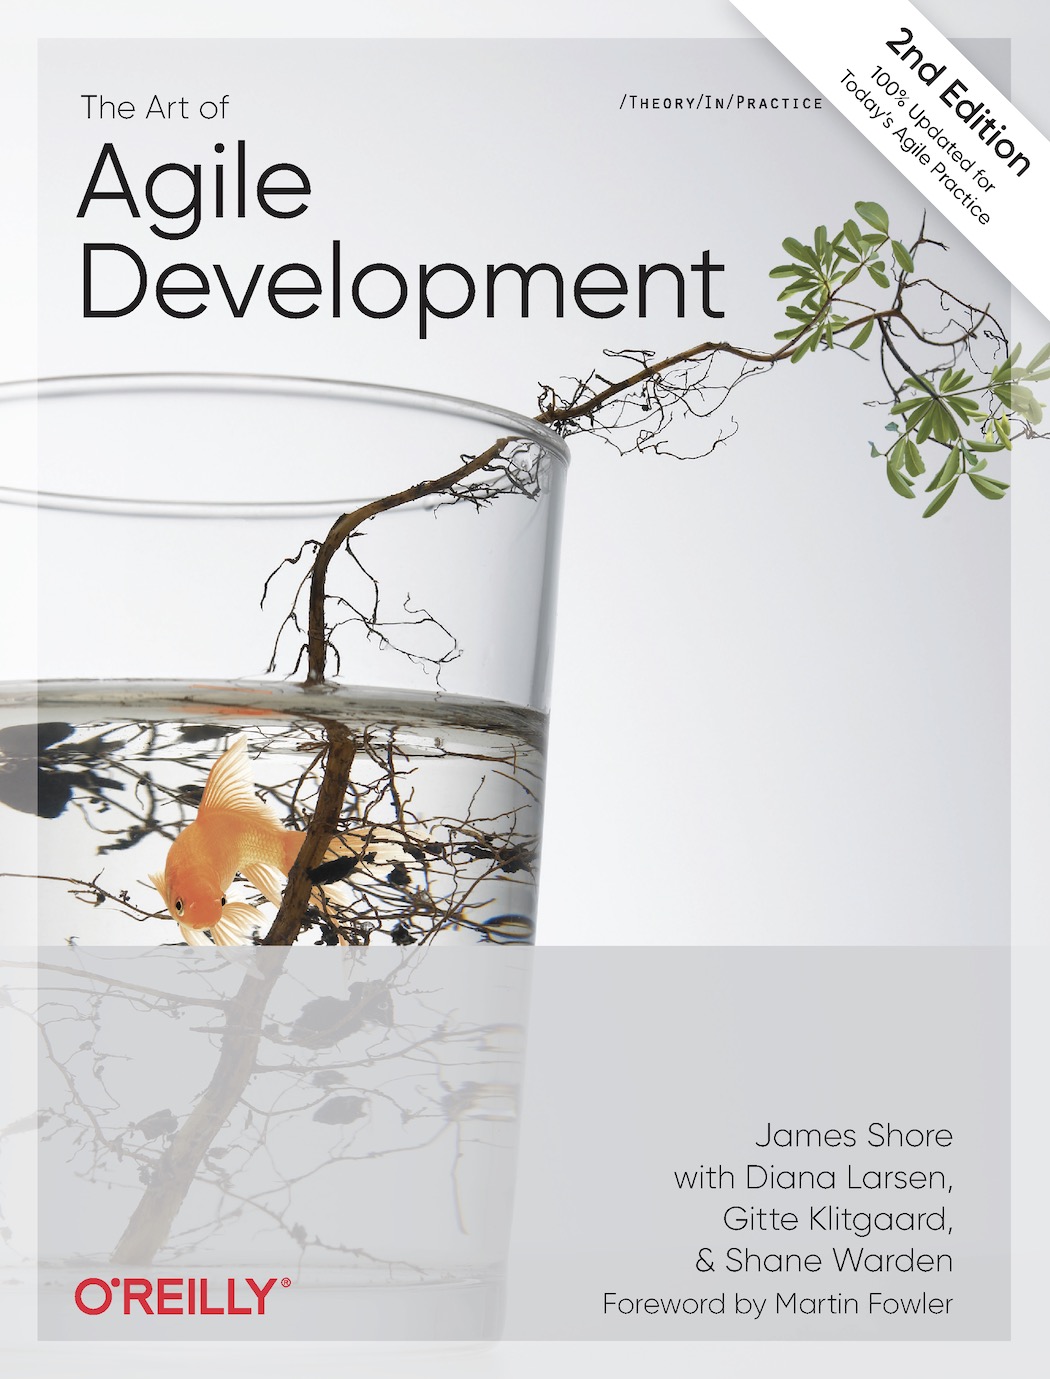 Book cover for “The Art of Agile Development, Second Edition” by James Shore. Published by O'Reilly. The cover artwork shows a water glass containing a small sapling. The sapling has small green leaves. There is a goldfish in the glass.